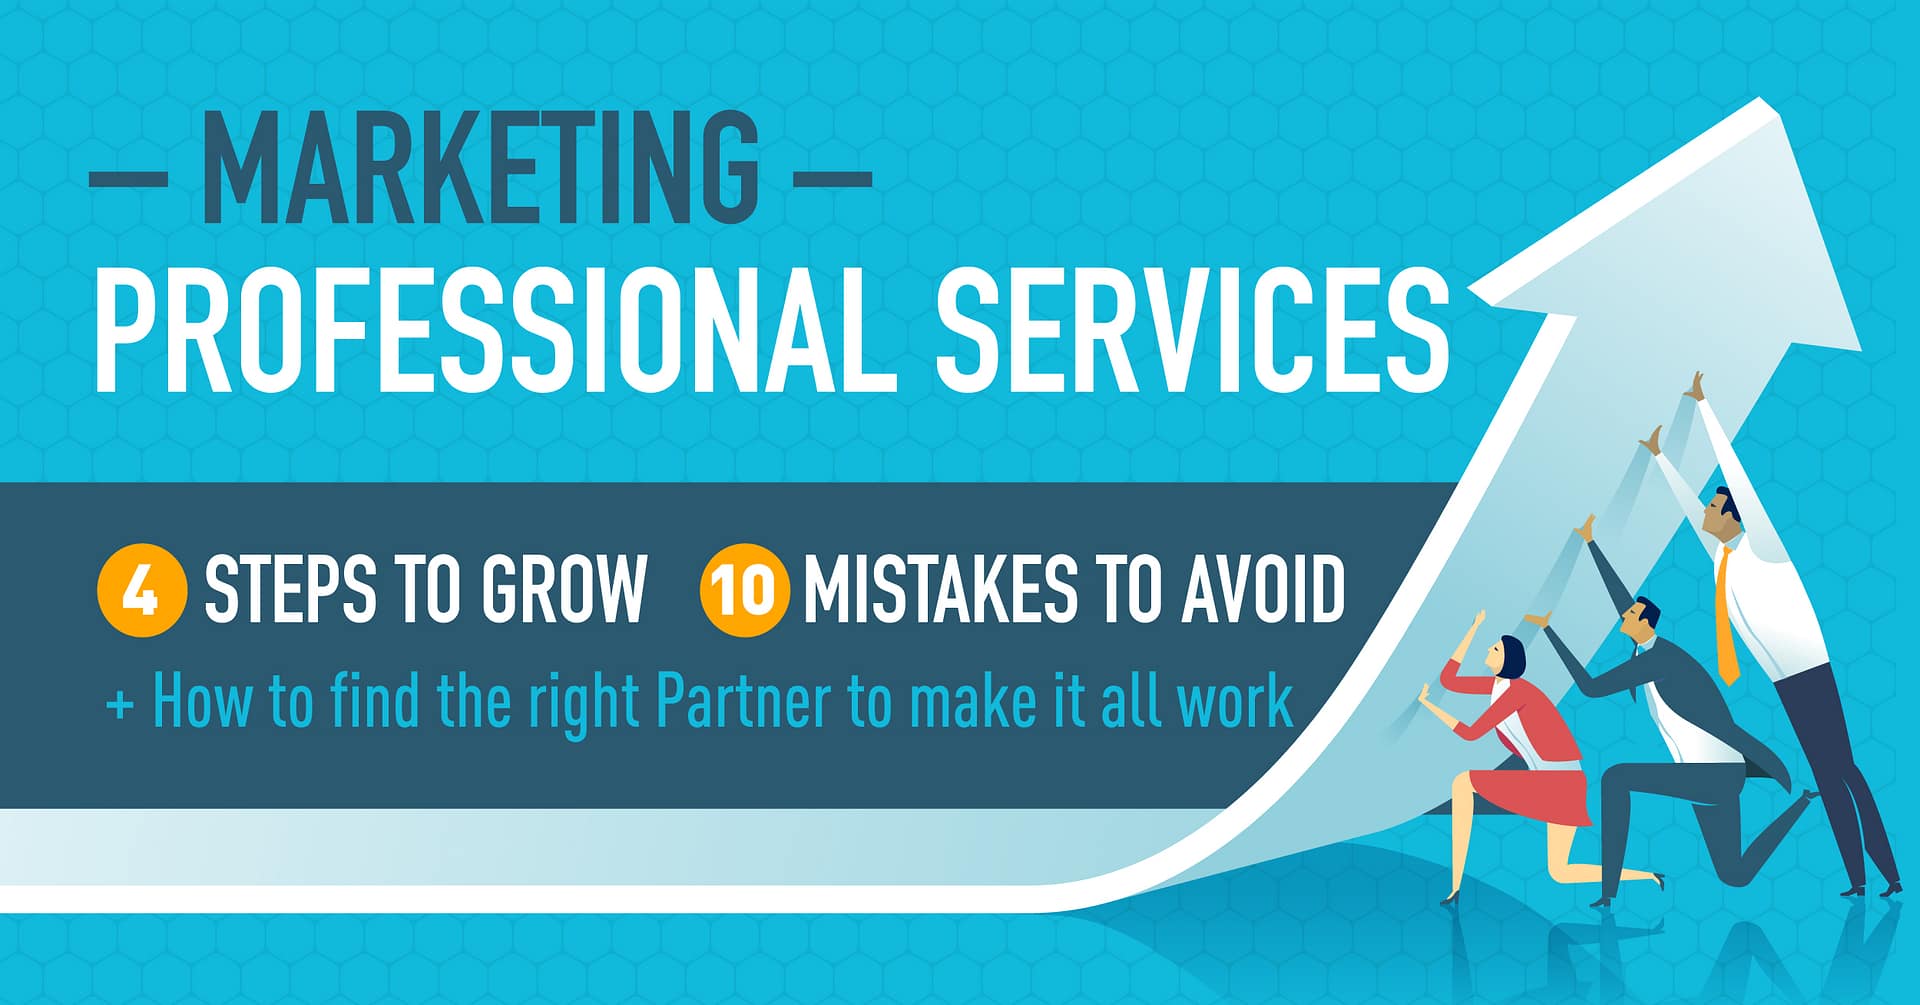 thumbnail image for [eBook] Marketing Professional Services—4 Steps to Grow, 10 Mistakes to Avoid